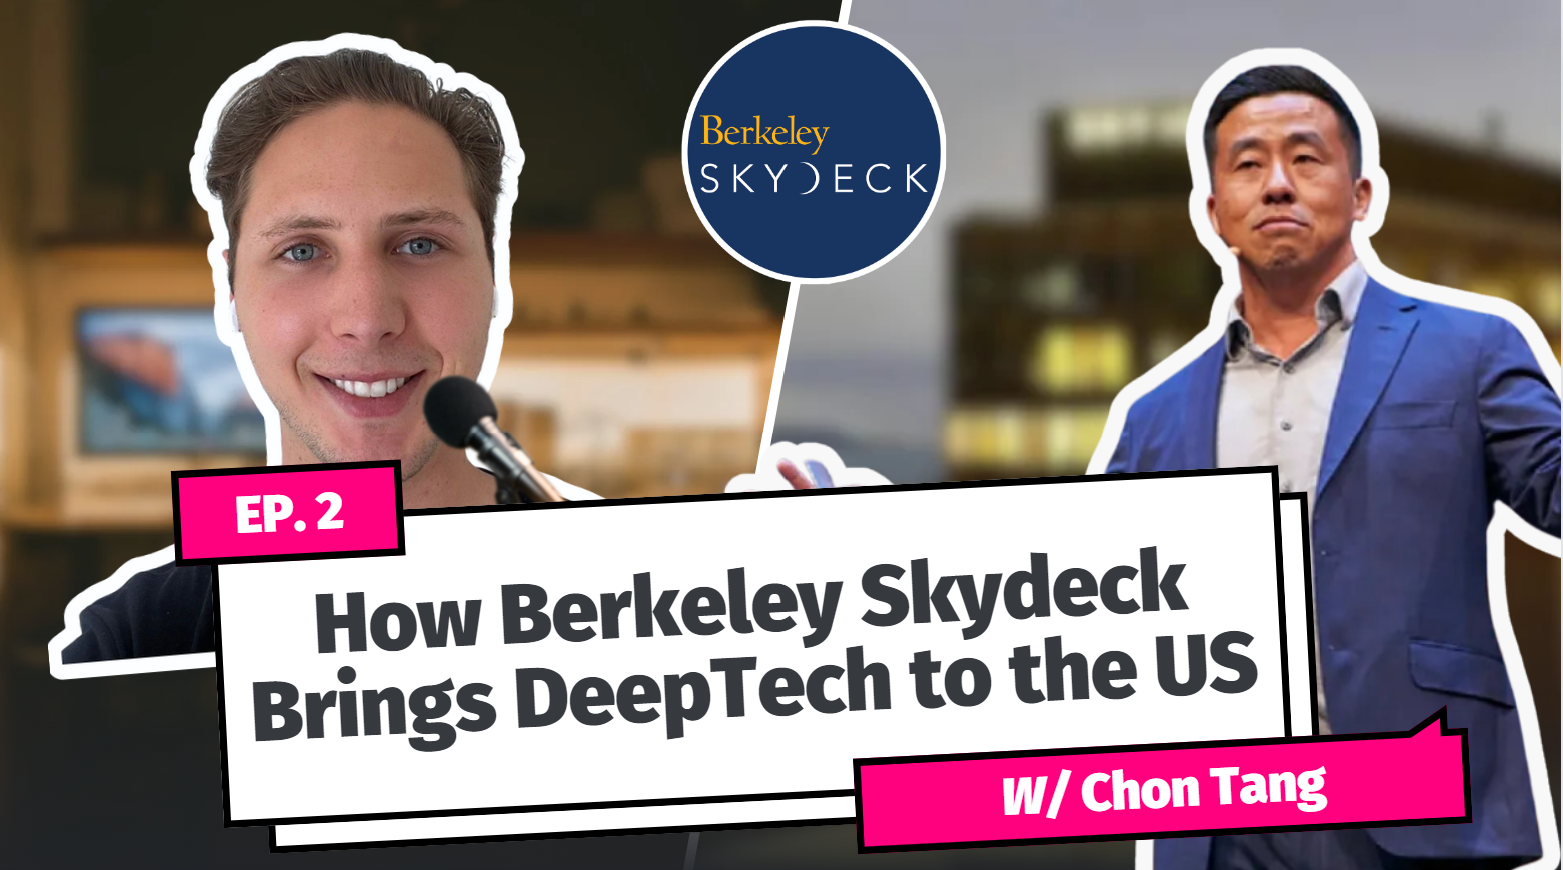 How Berkeley Skydeck brings deeptech to the US